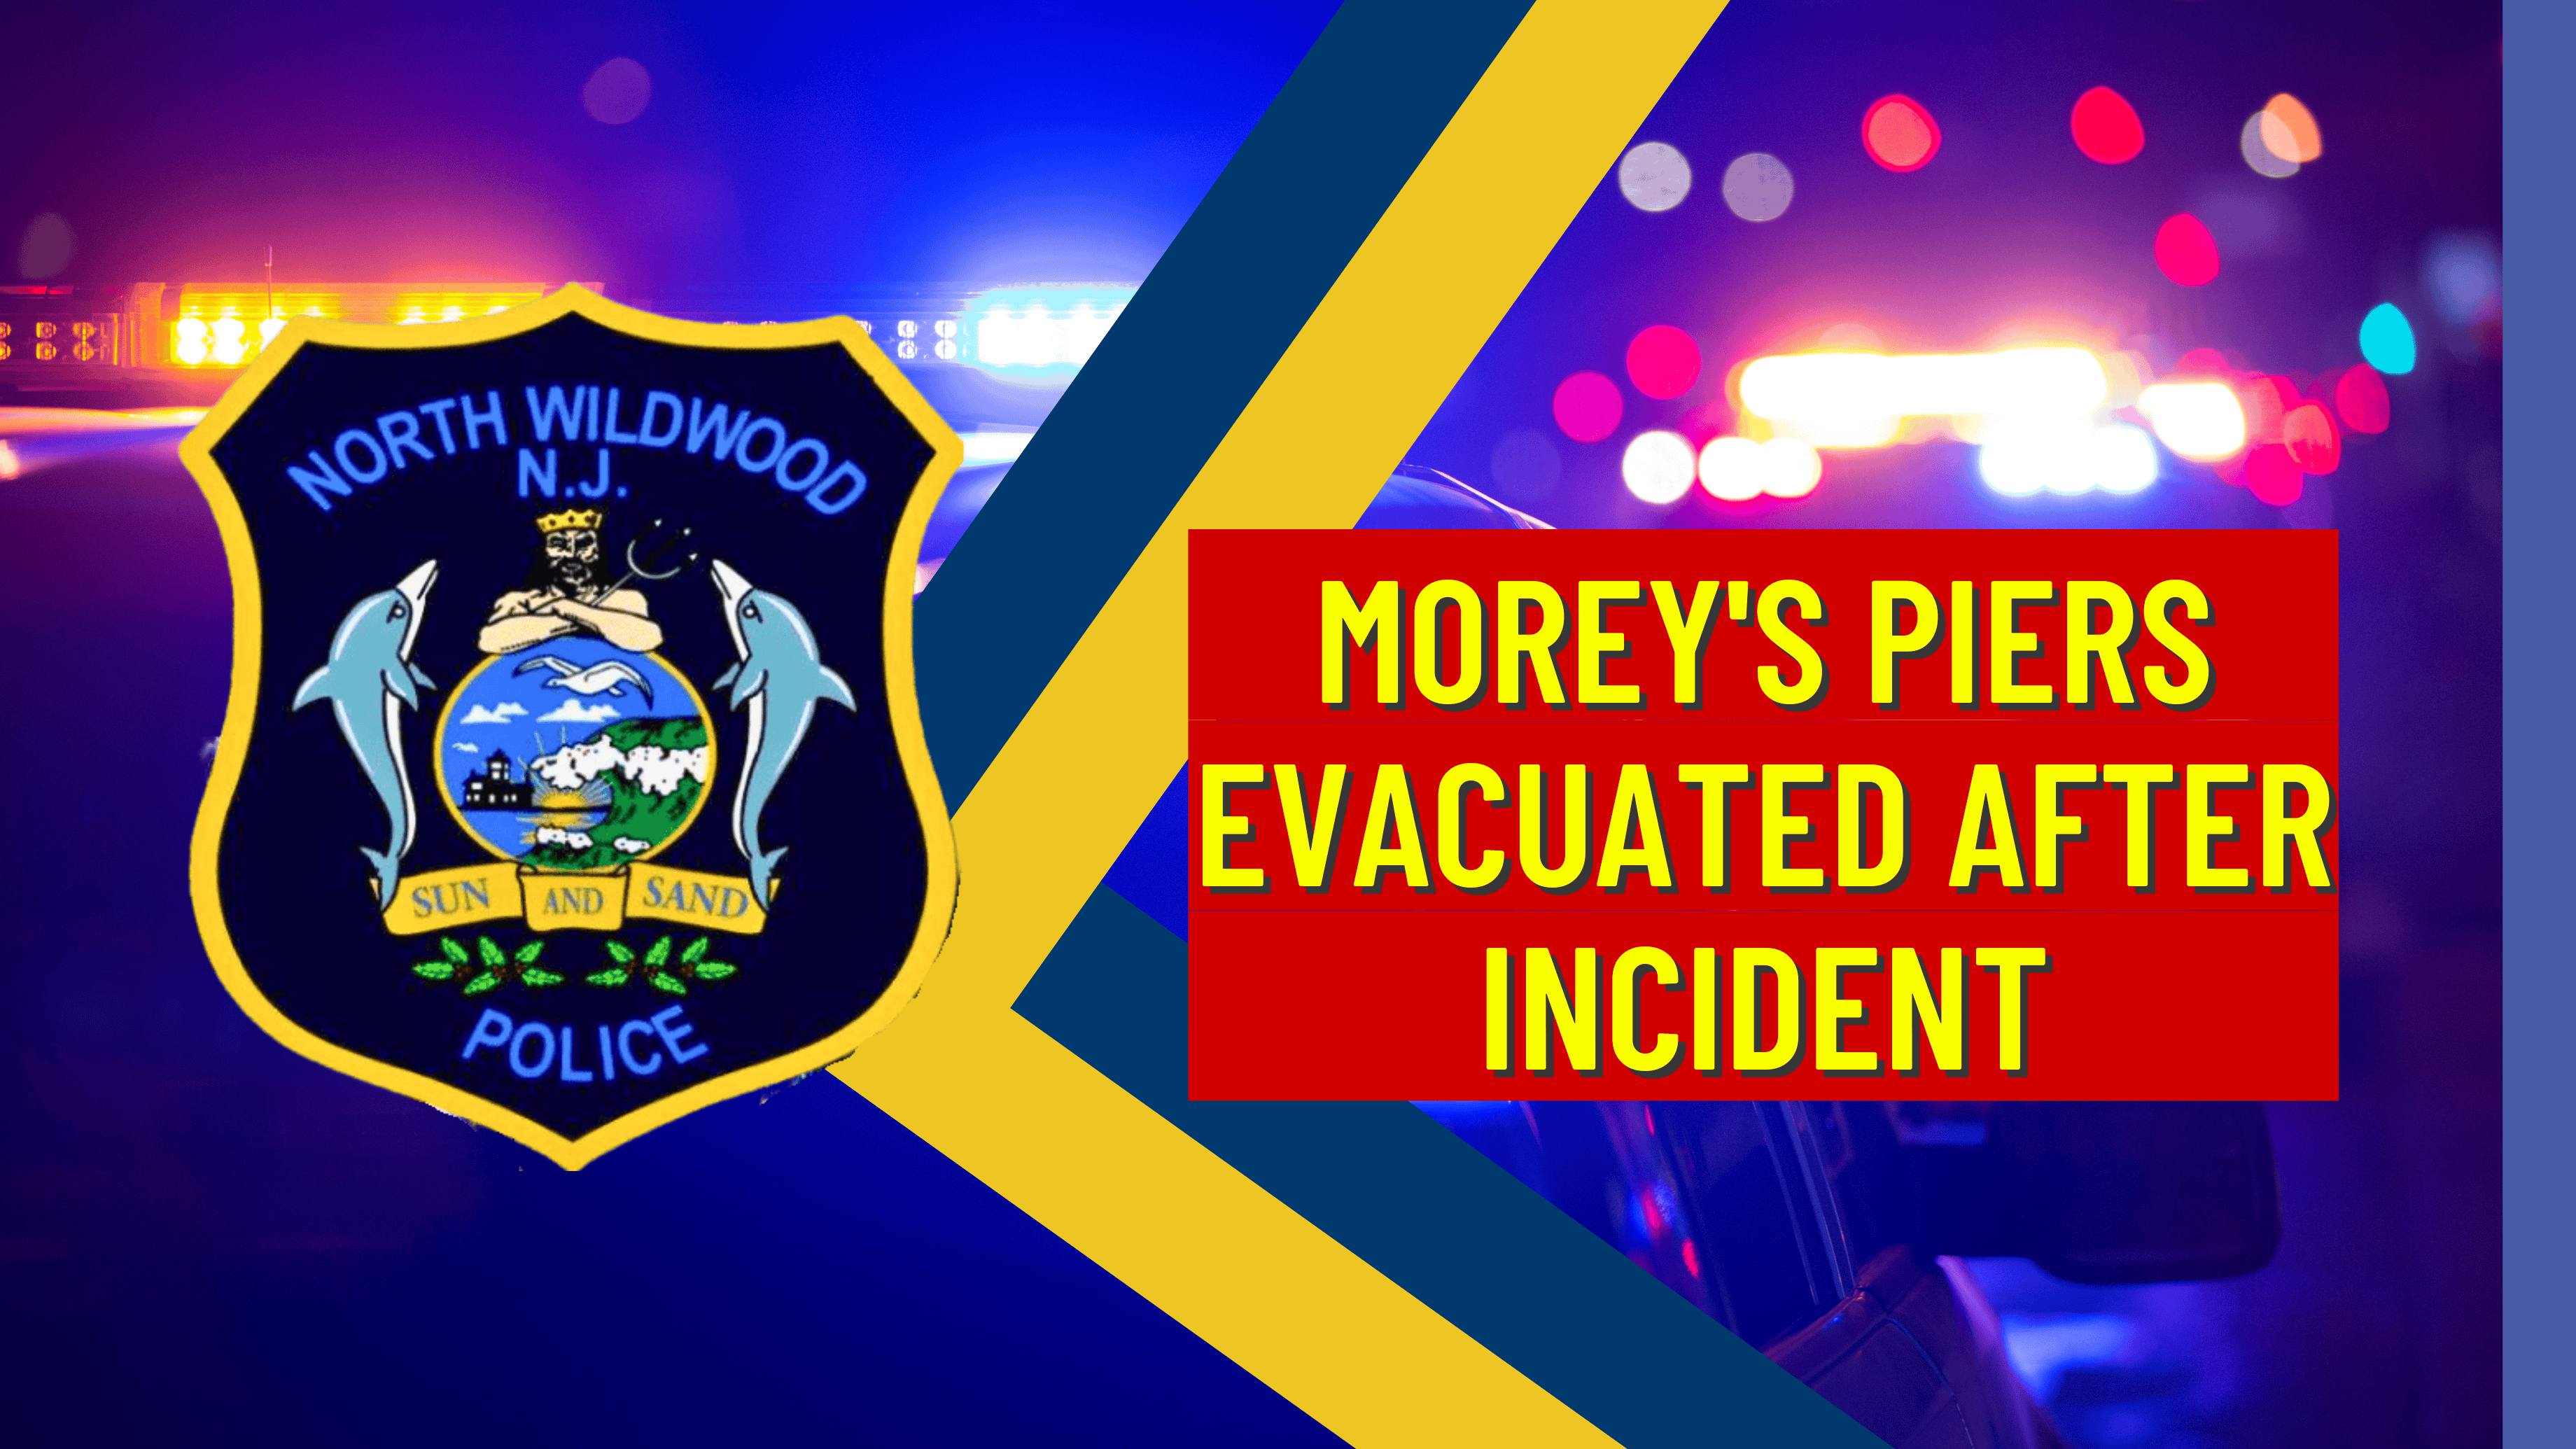 Morey's Piers Evacuated After Incident